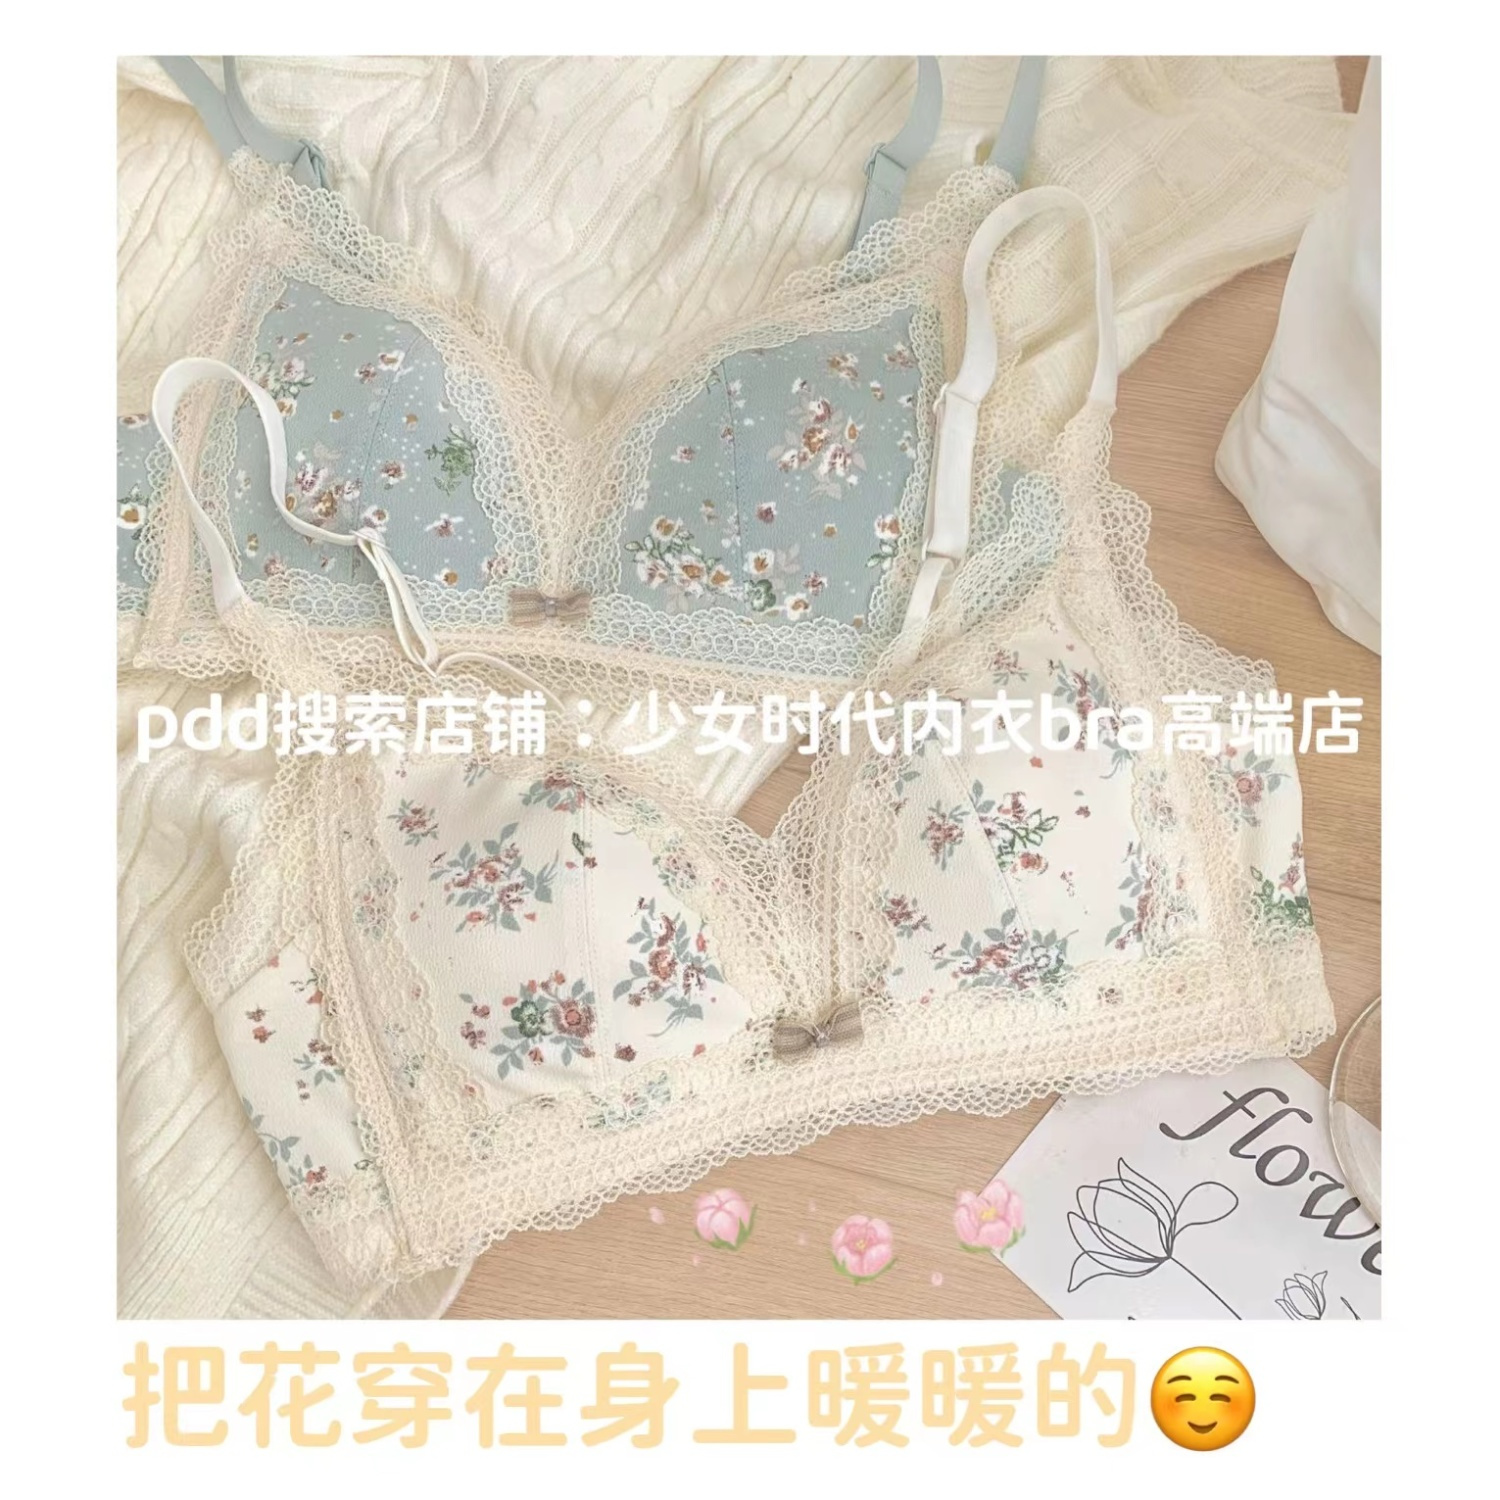 French-style back garden~ Ladies lace without steel ring small chest push-up bra underwear female pure desire to show chest small mood bra